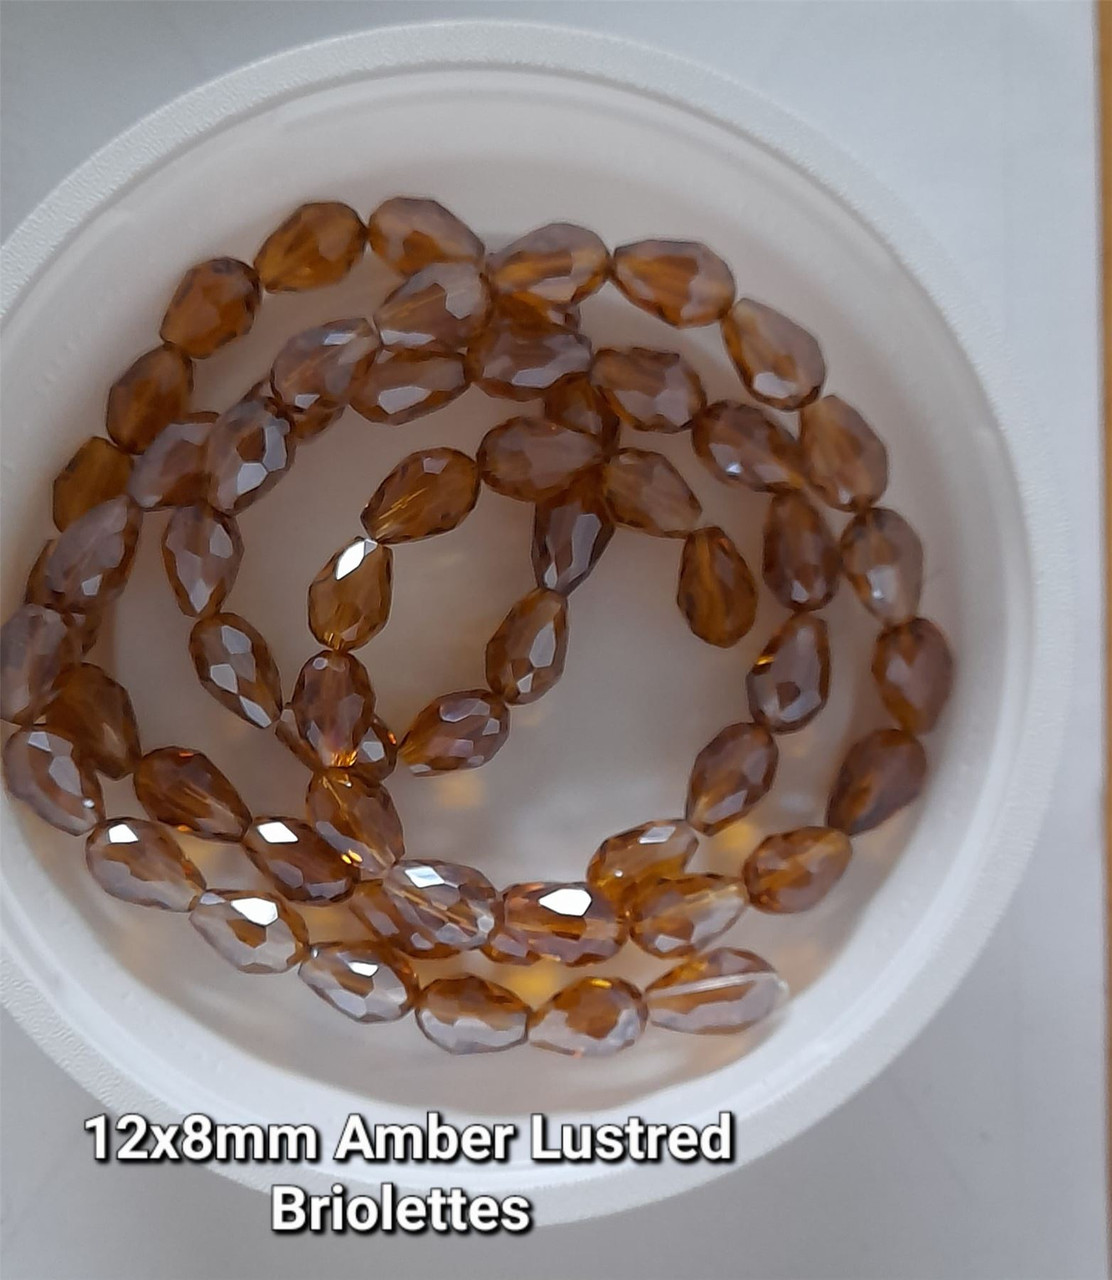 Strand of faceted drop glass beads (briolettes) - approx 12x8mm, Amber Lustered, approx 60 beads